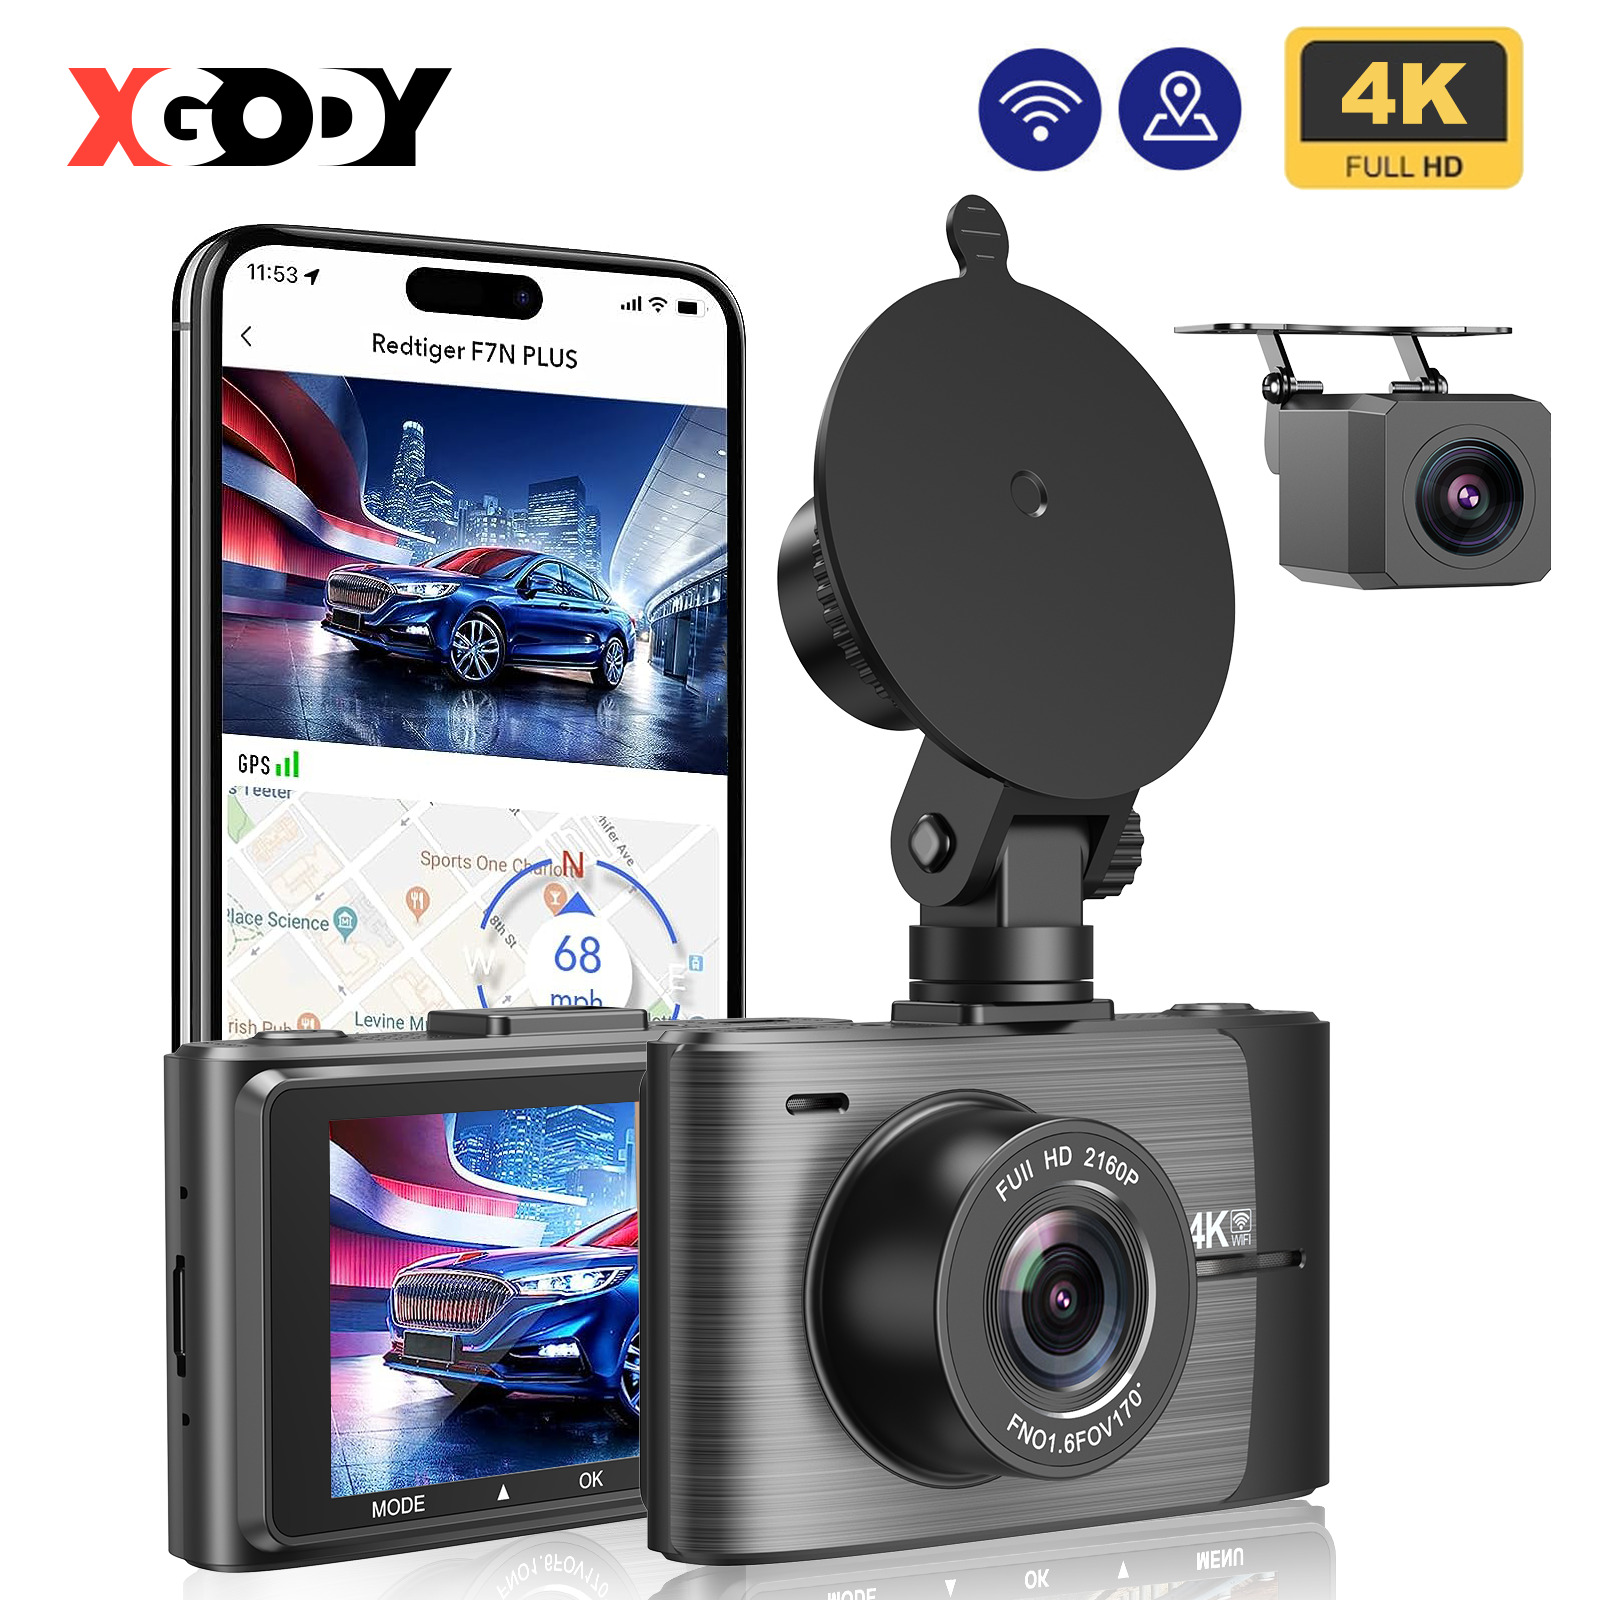 XGODY 4K Dual Dash Camera DVR Front and Rear Dash Cam Built-in WiFi&GPS for Cars